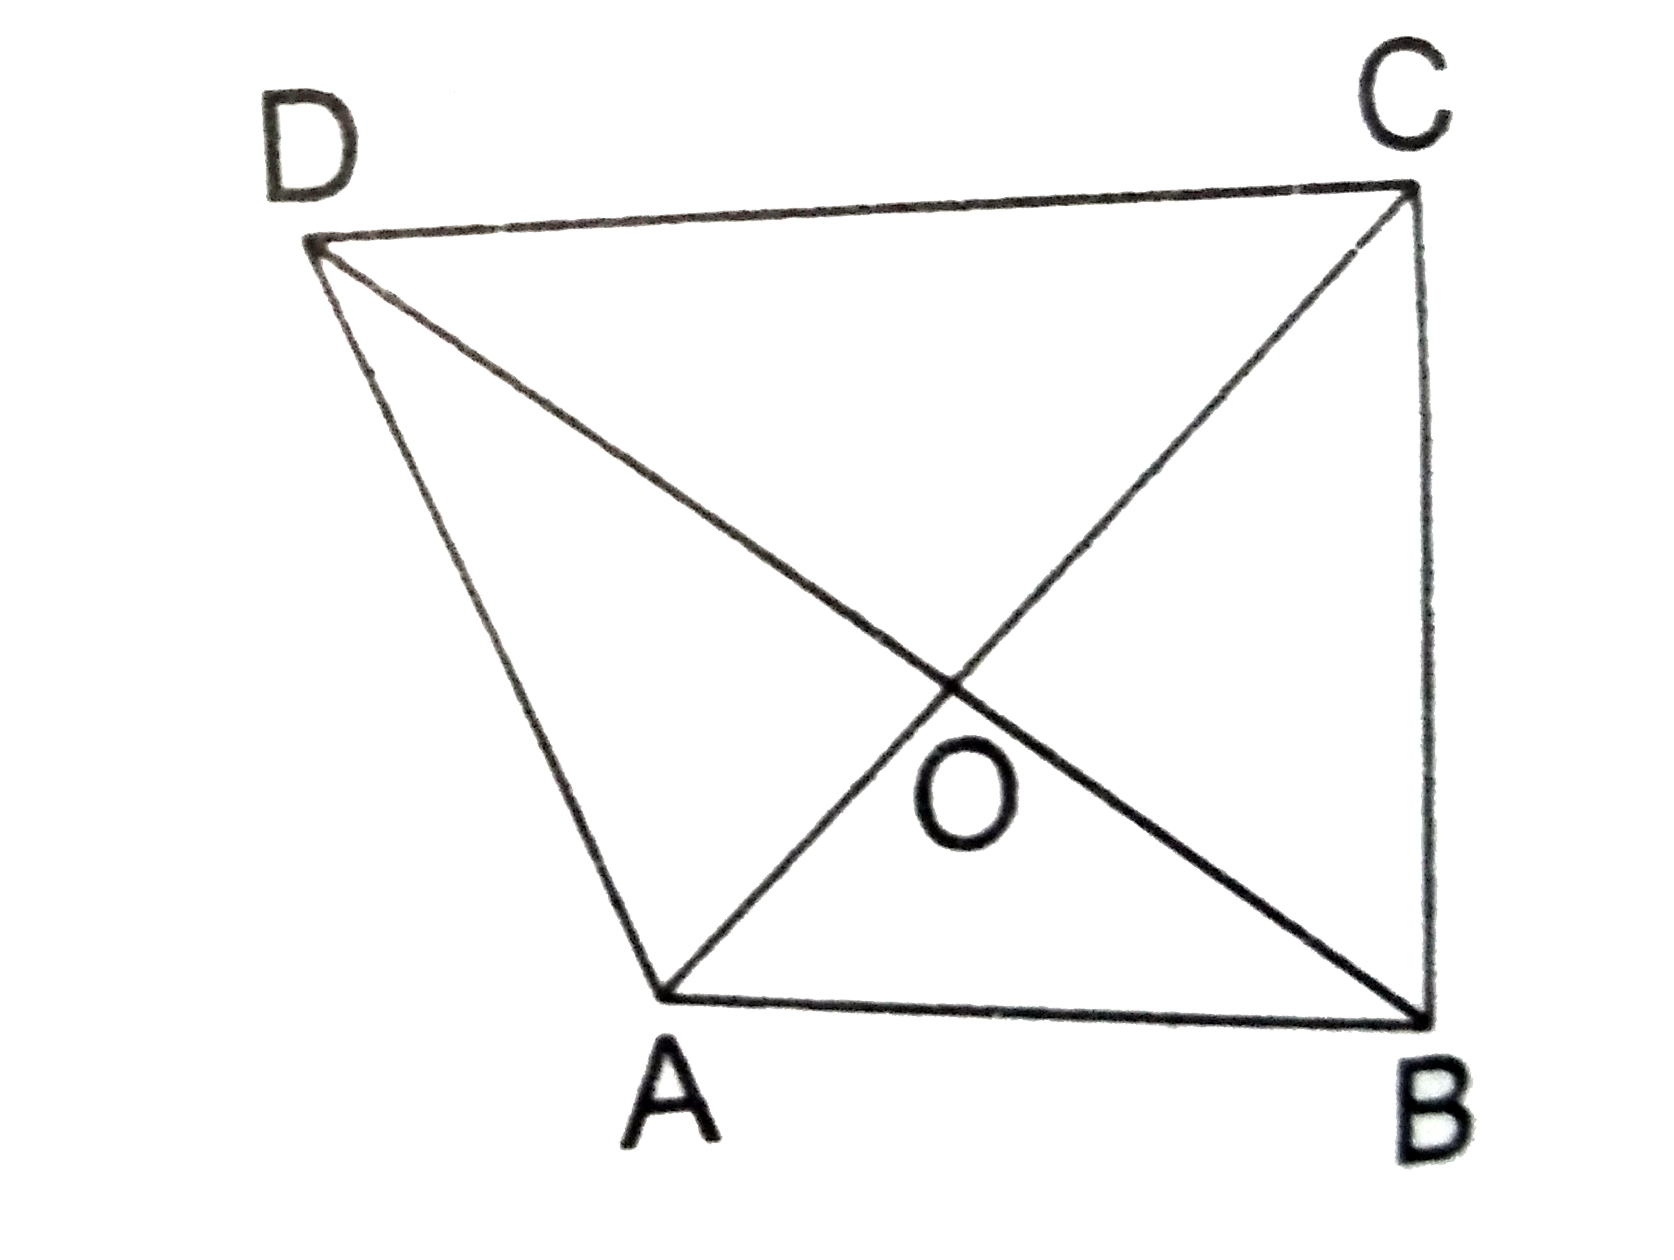 In the adjoining figure, the diagonals AC and BD of a quadrilateral ABCD intersect at O.   If  BO = OD, prove that   ar(triangleABC)=ar(triangleADC).